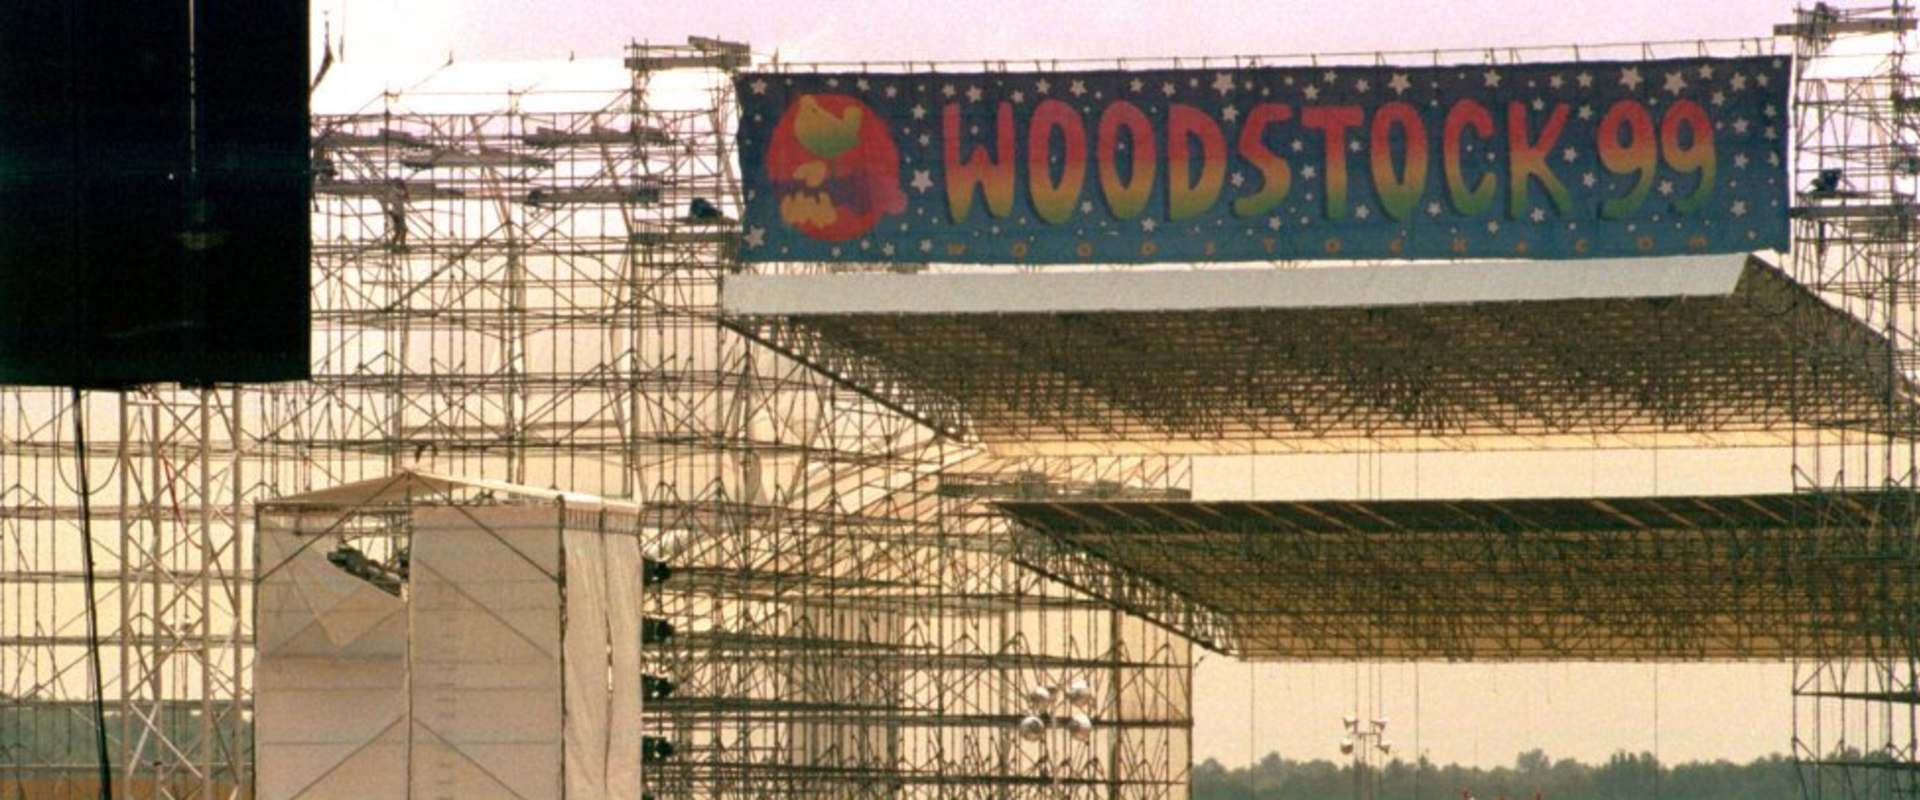 Woodstock 99: Peace, Love, and Rage background 1